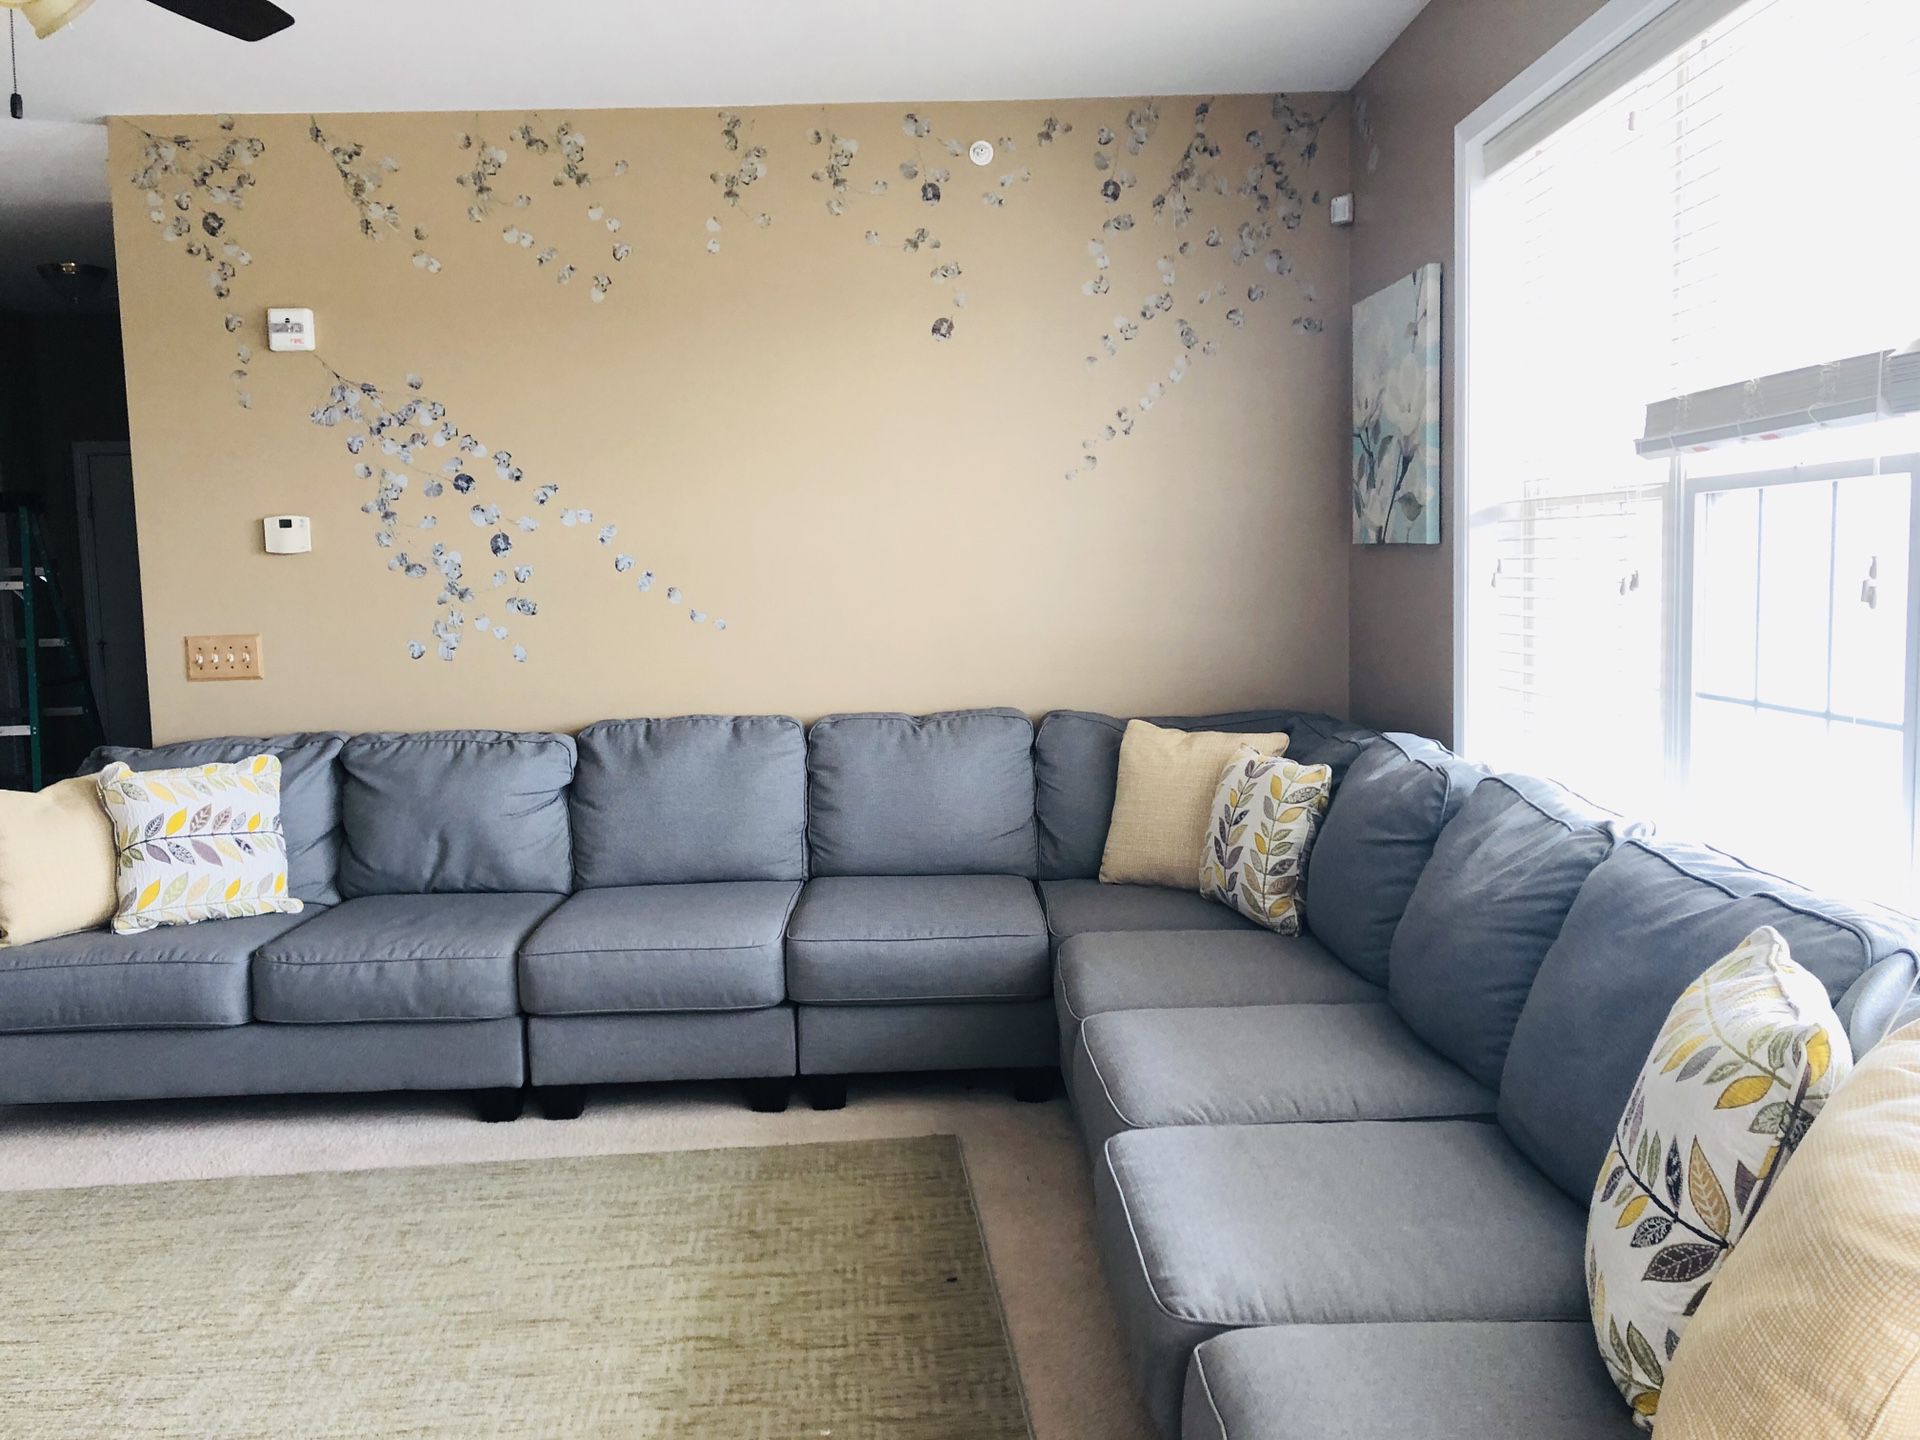 Brand new sectional sofa